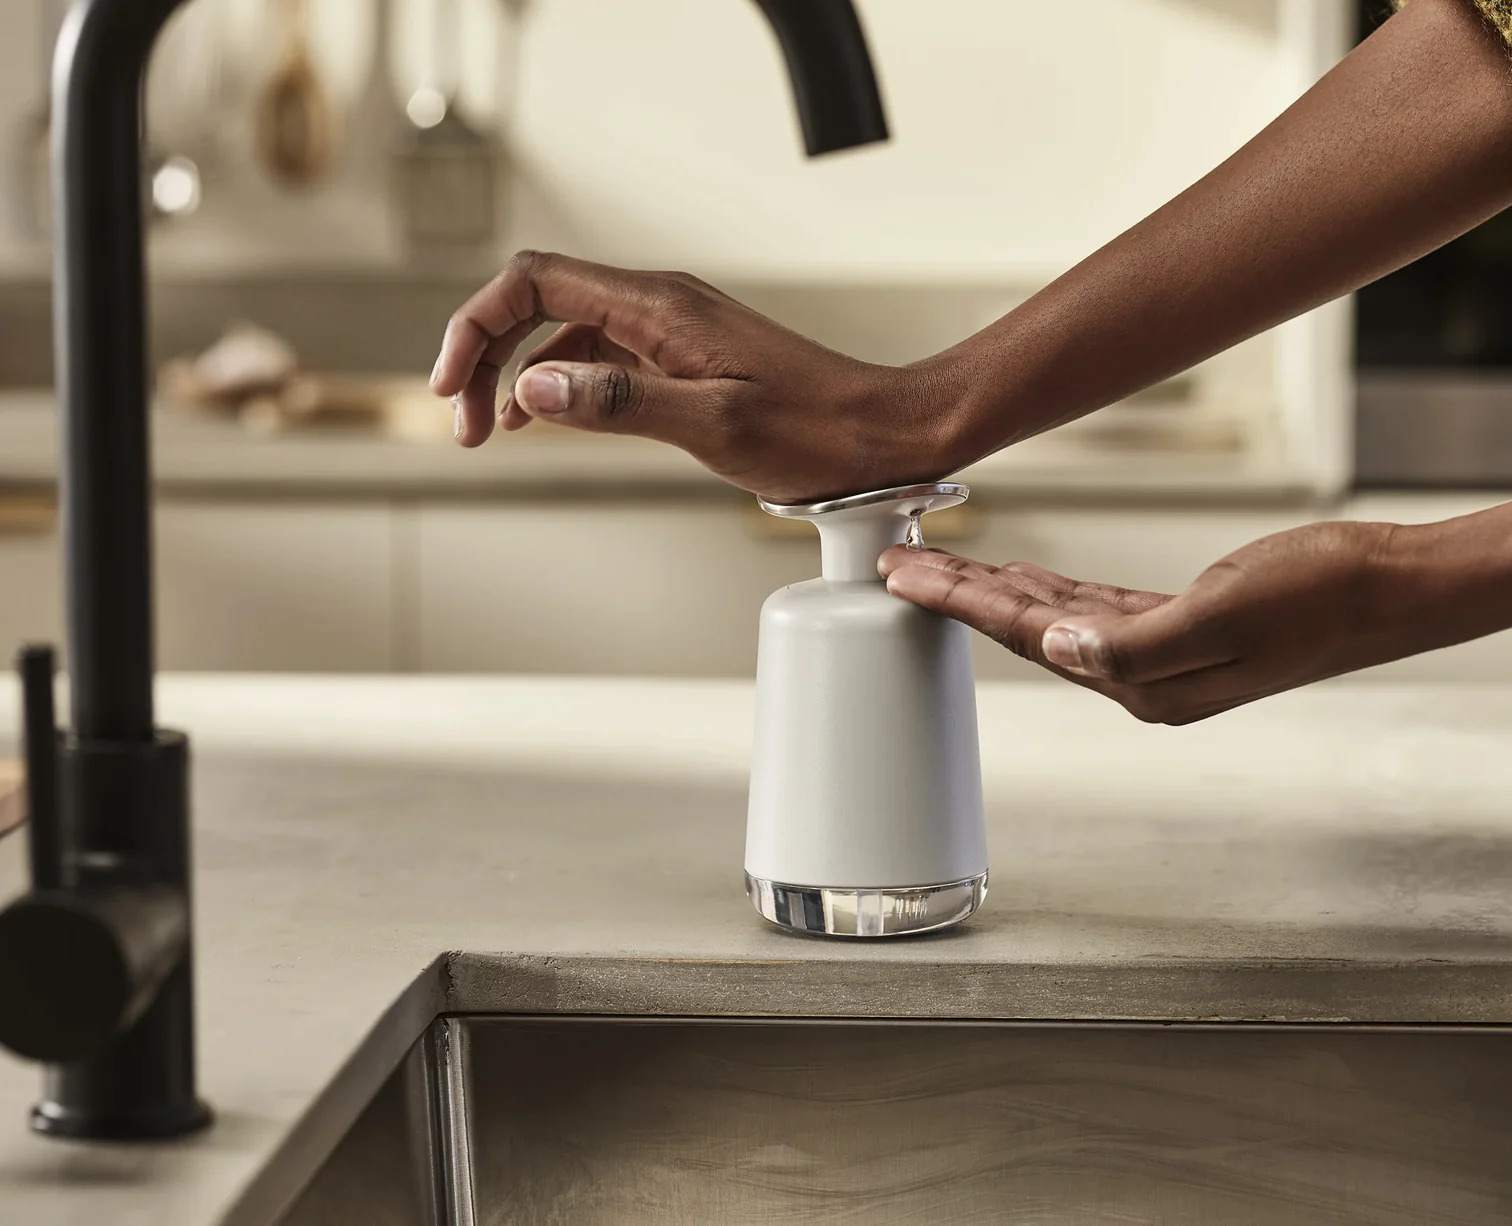 Where To Place Soap Dispenser On Kitchen Sink